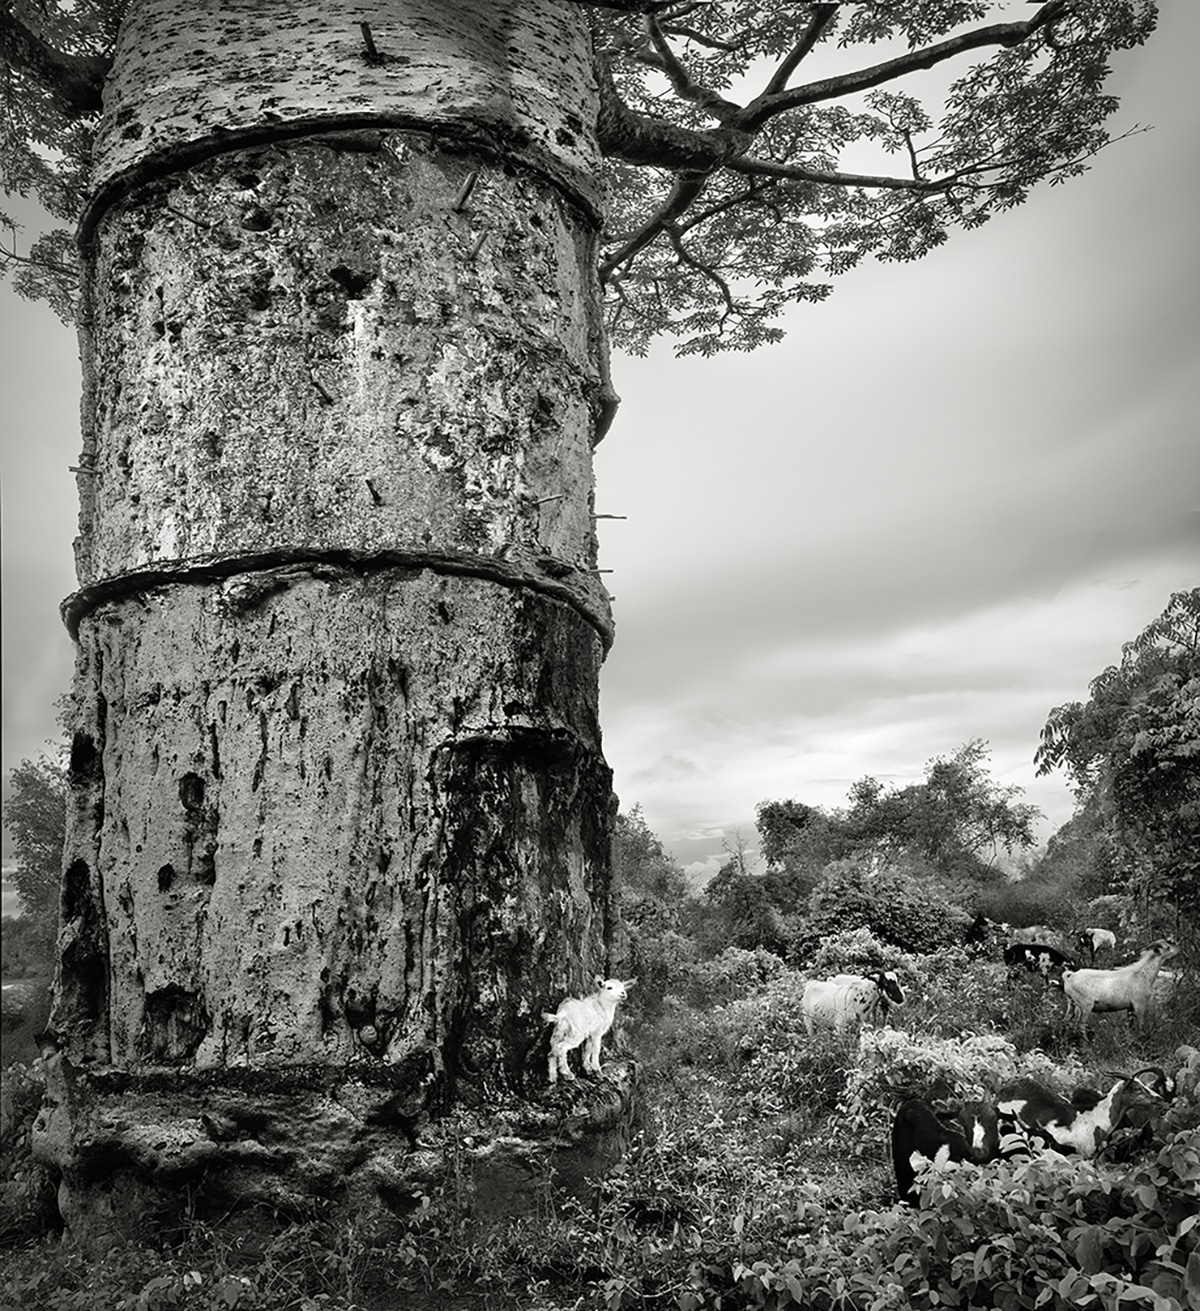 Photographer Beth Moon Takes Stunning Black-And-White Images of Ancient Baobab Trees in Madagascar